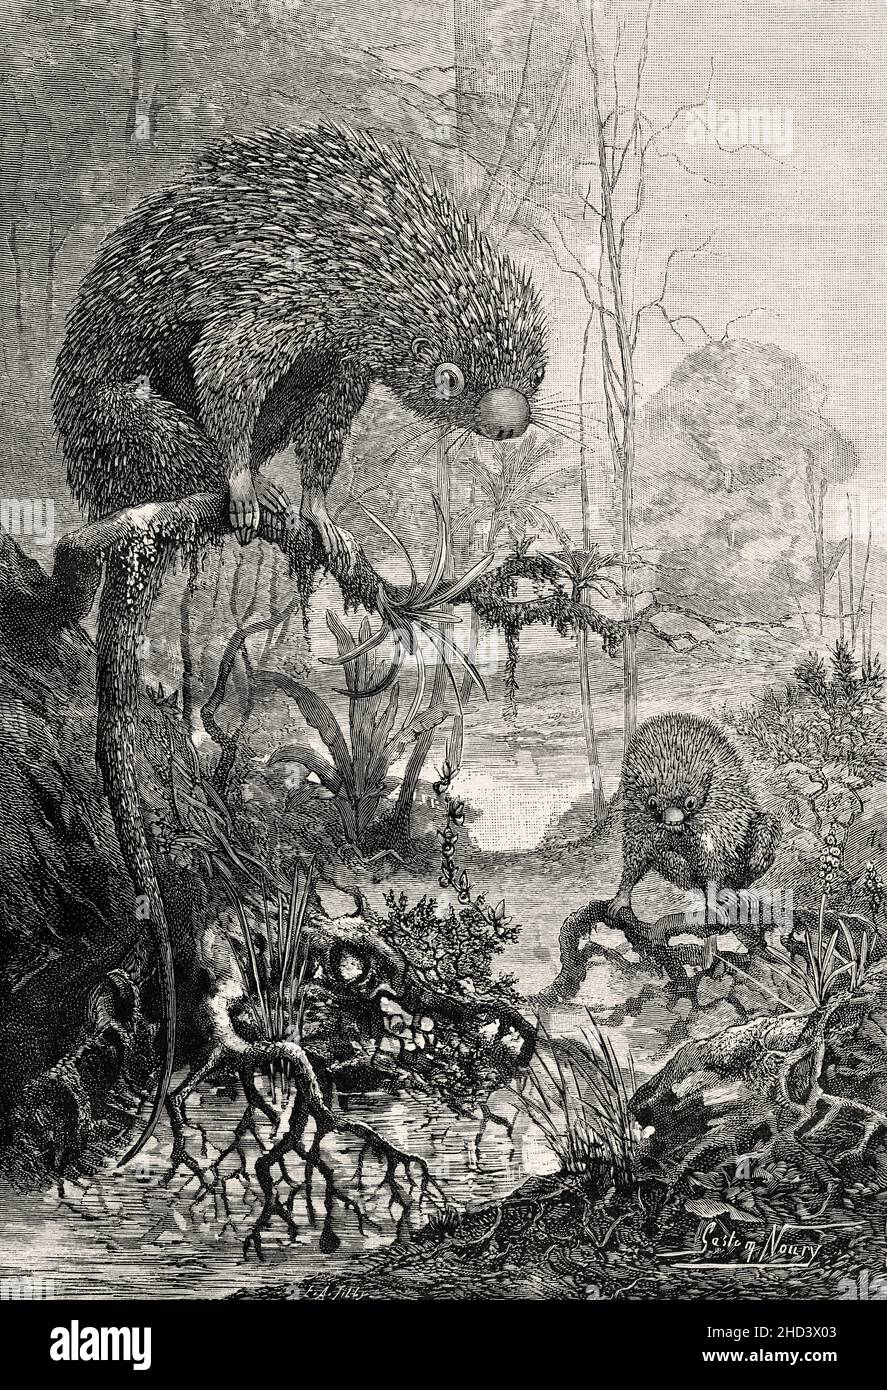 The prehensile-tailed porcupines or coendous (Genus Coendou) Old 19th century engraved illustration from La Nature 1885 Stock Photo